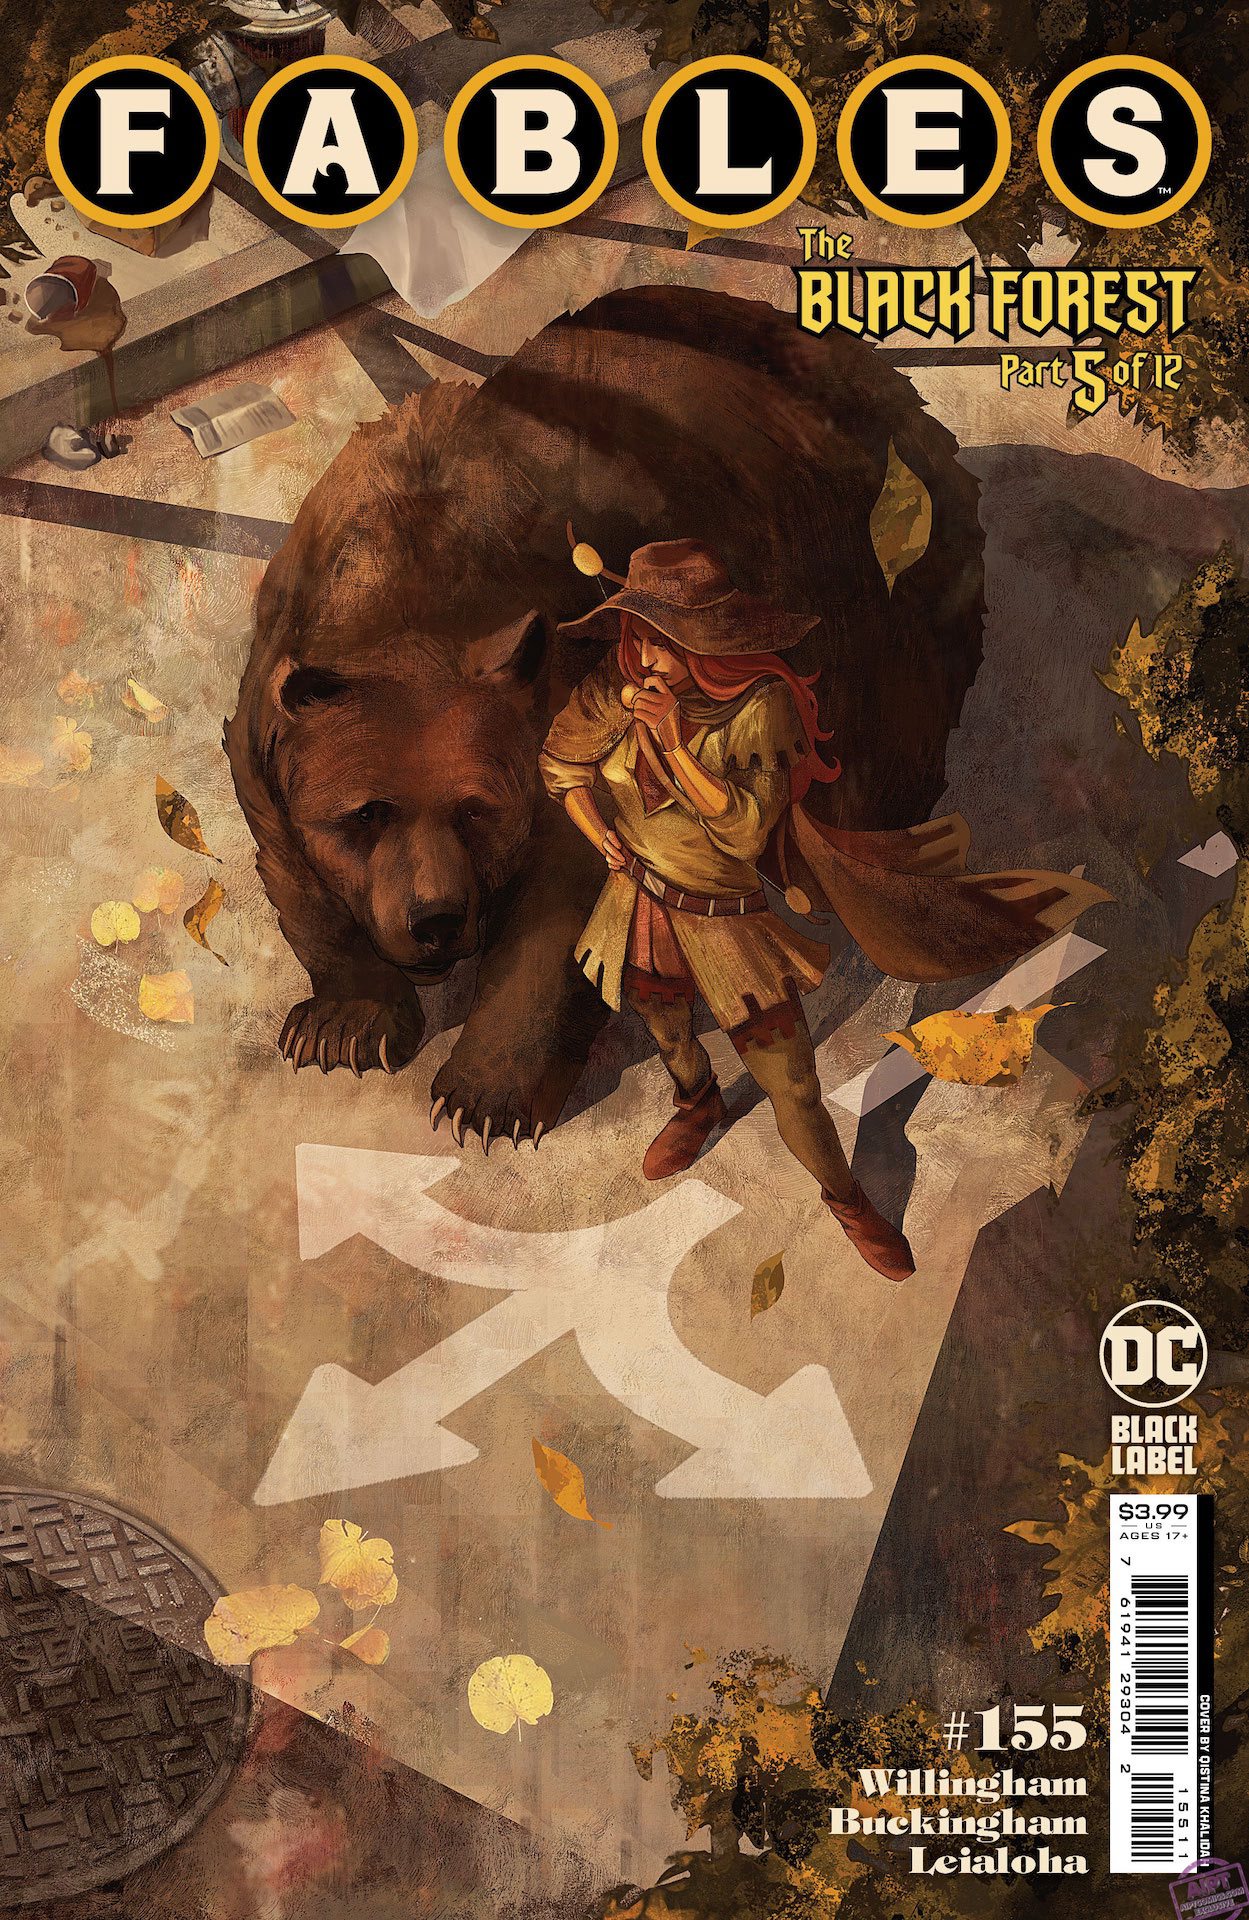 DC Preview: Fables #155